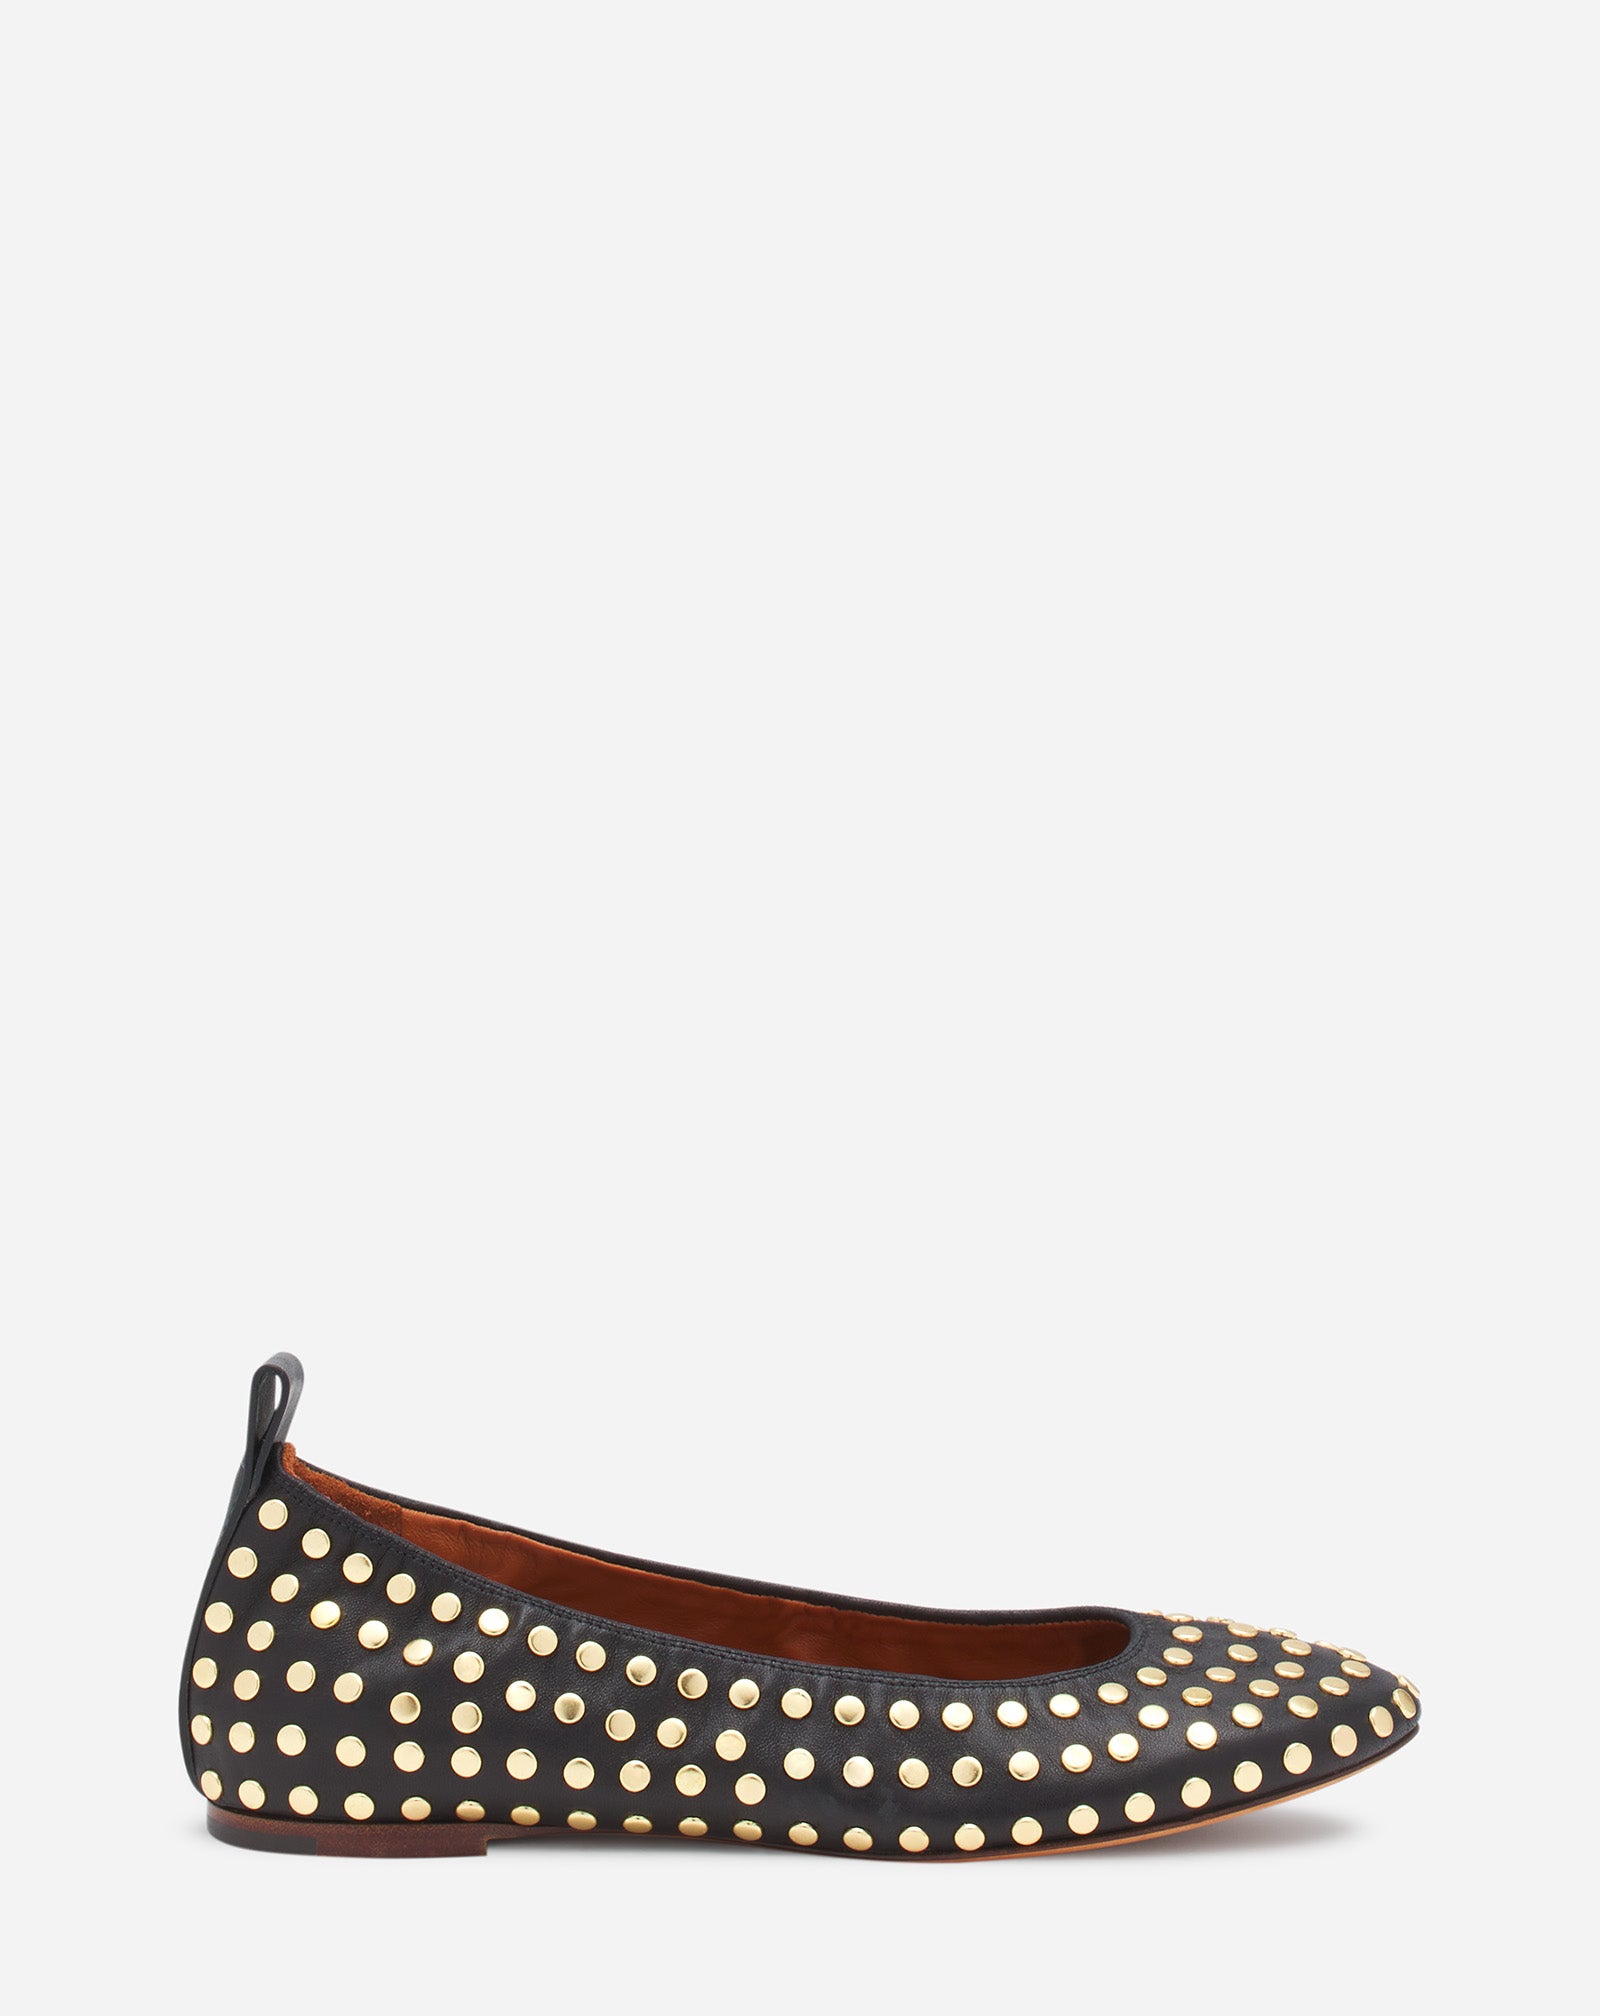 THE LEATHER BALLERINA FLAT WITH STUDS